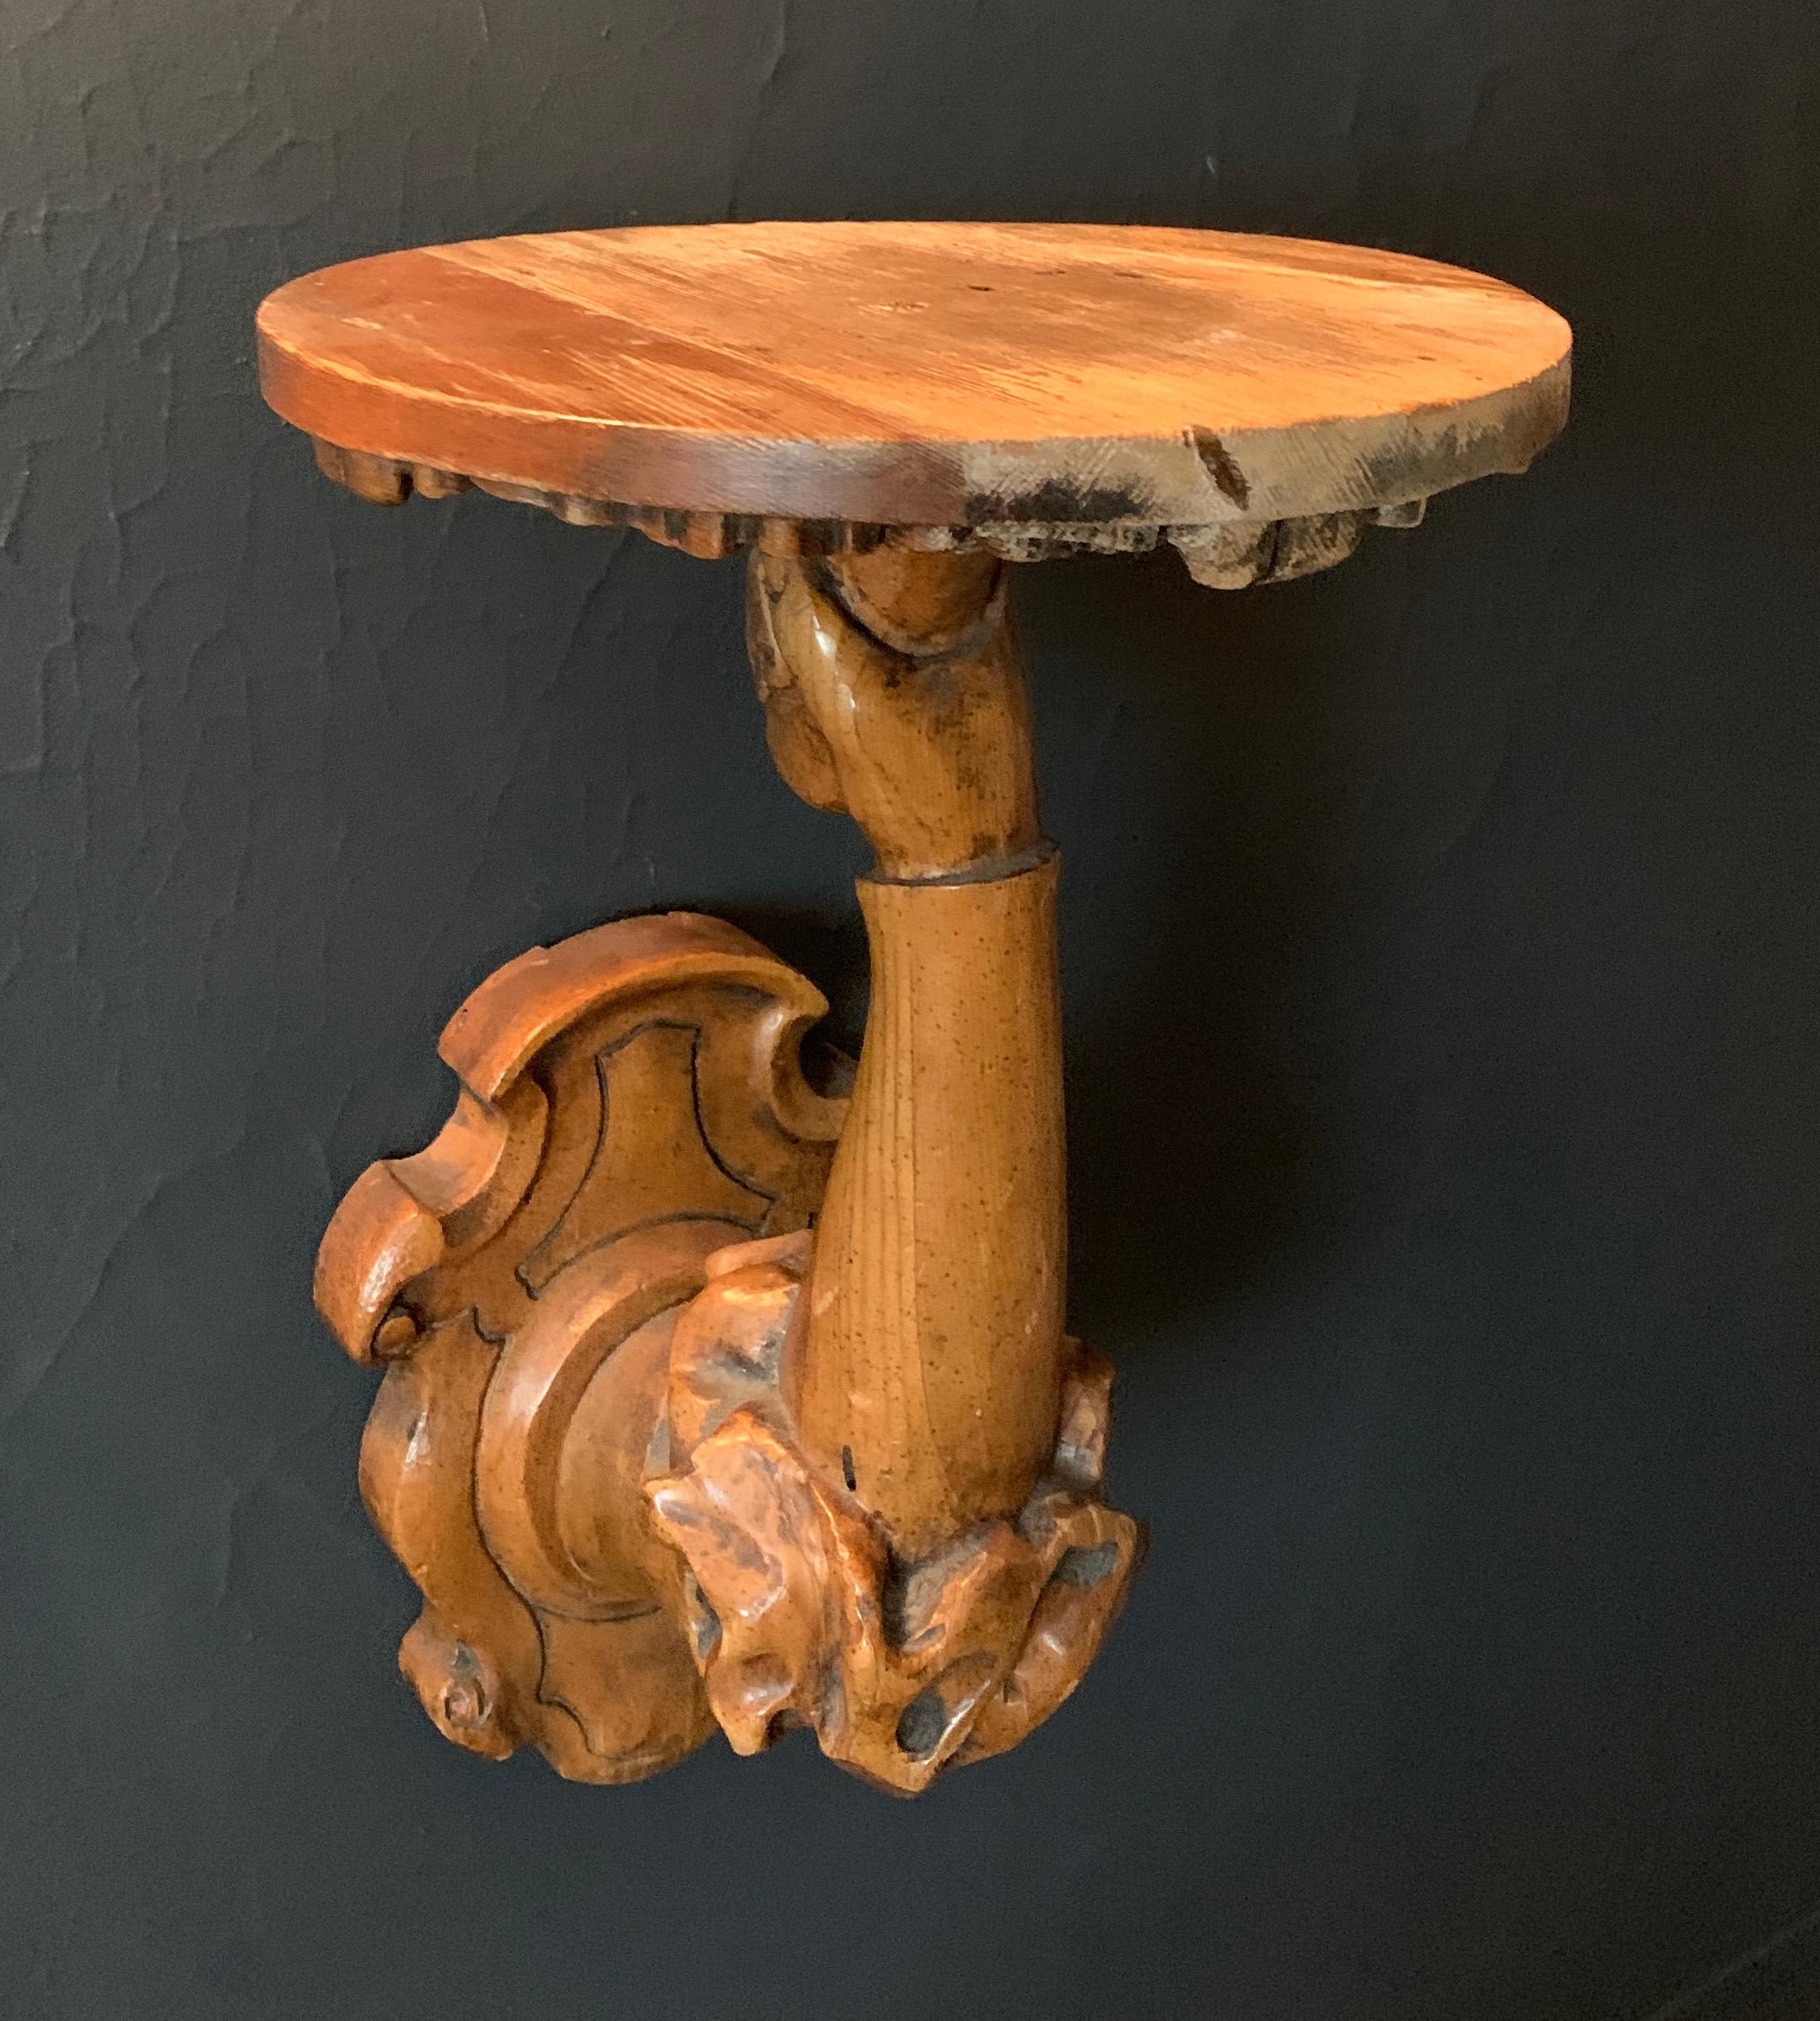 A very special wall shelf bracket - arm to hand, holding a round shelf with bracket. The hand carved piece is uniquely vintage and in good condition, with some wood discoloration but adds to the mystique and charm of this piece. We have placed